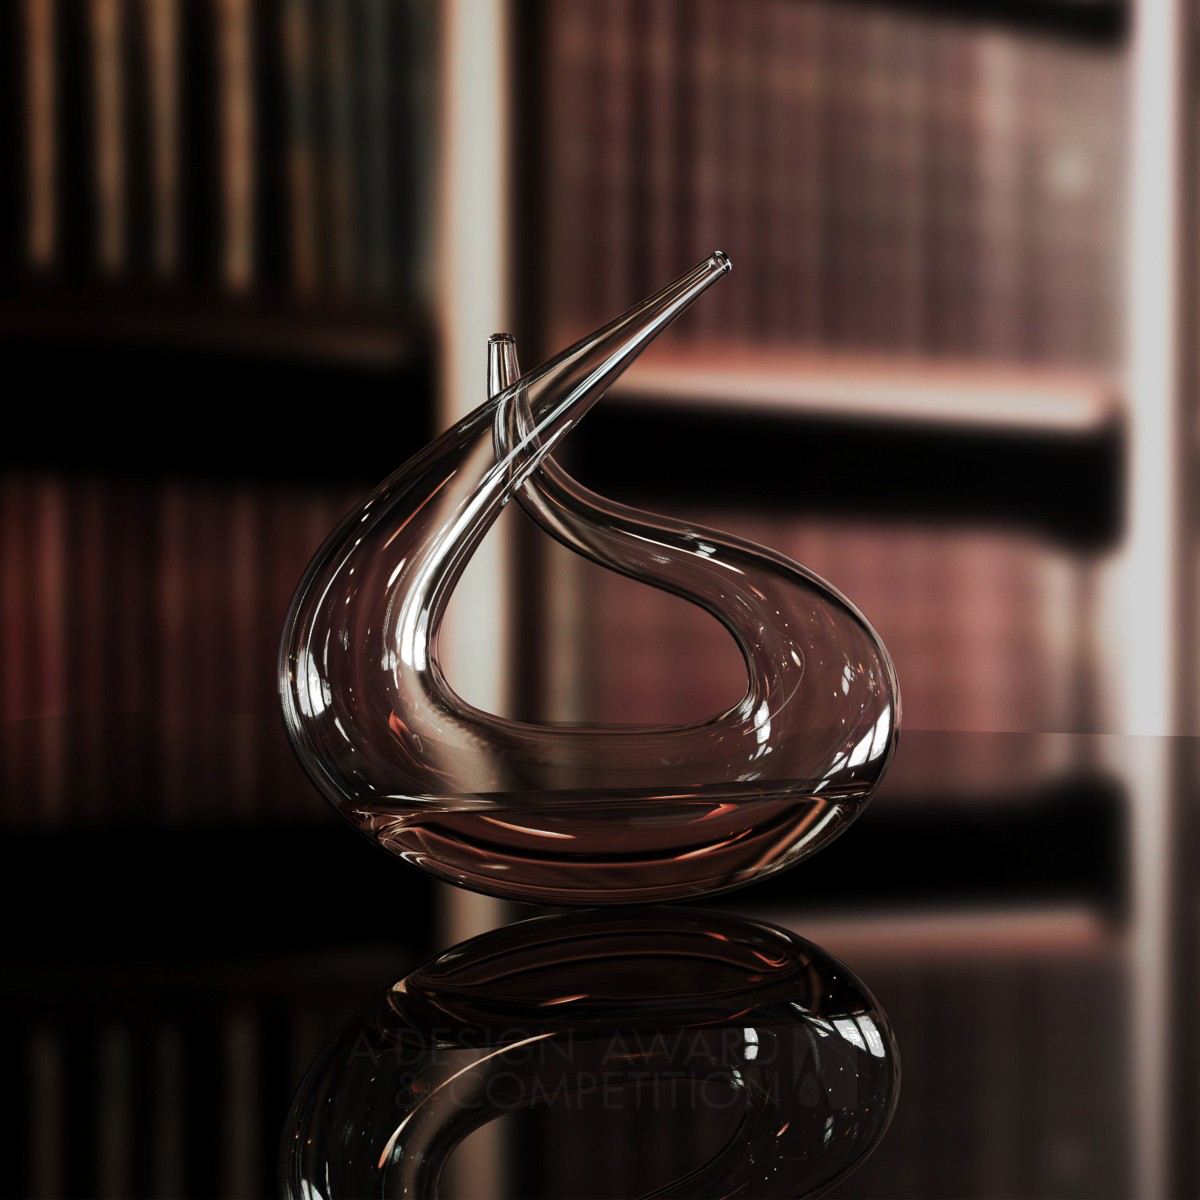 Etern Decanter: A Symbol of Impermanence and Celebration